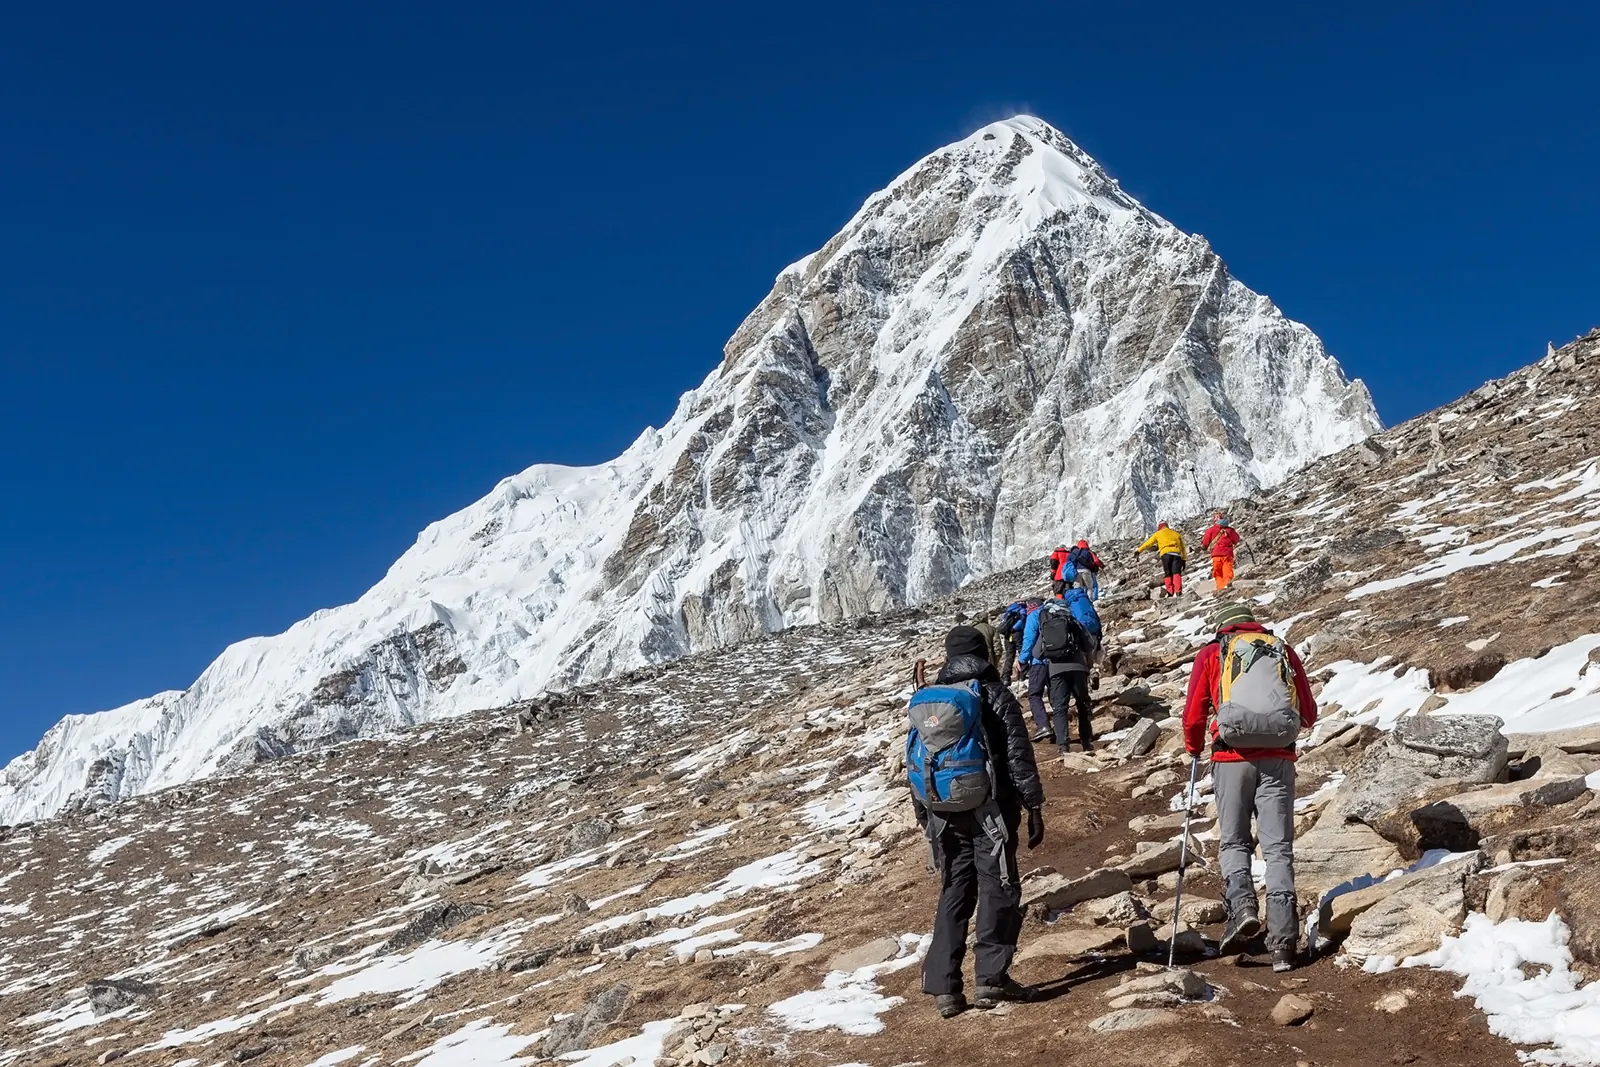 Trekkers on the way to Kala Patthar during Everest Base Camp Trek in May